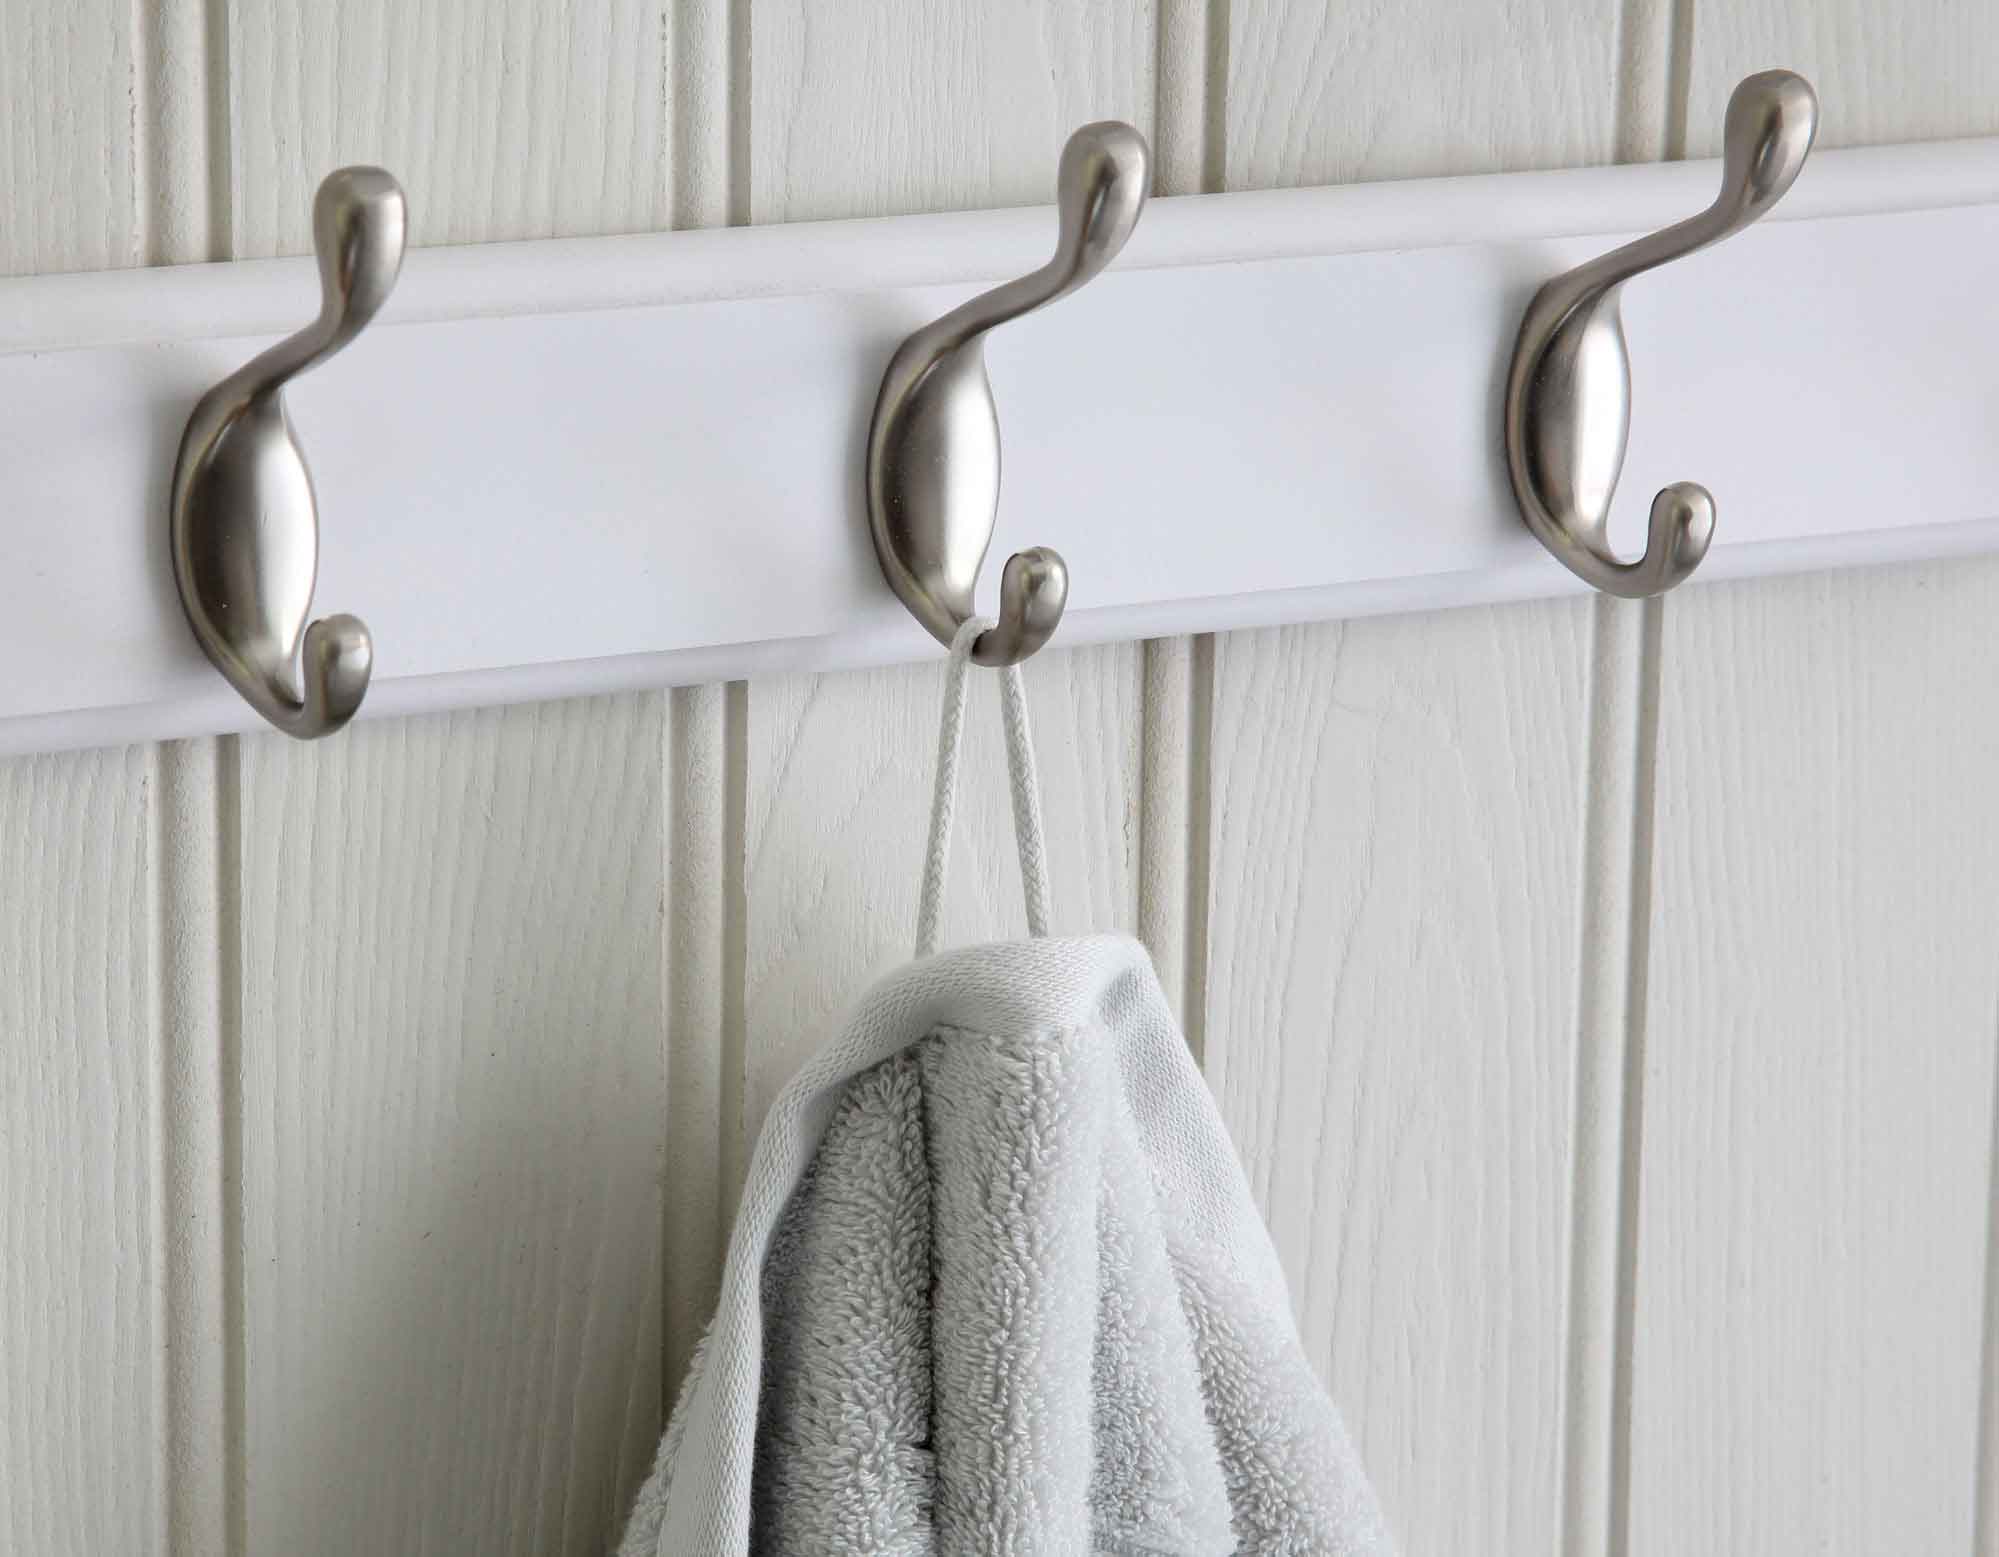 Egyptian cotton bath sheet in pearl grey hanging from hook on wall by towel loop